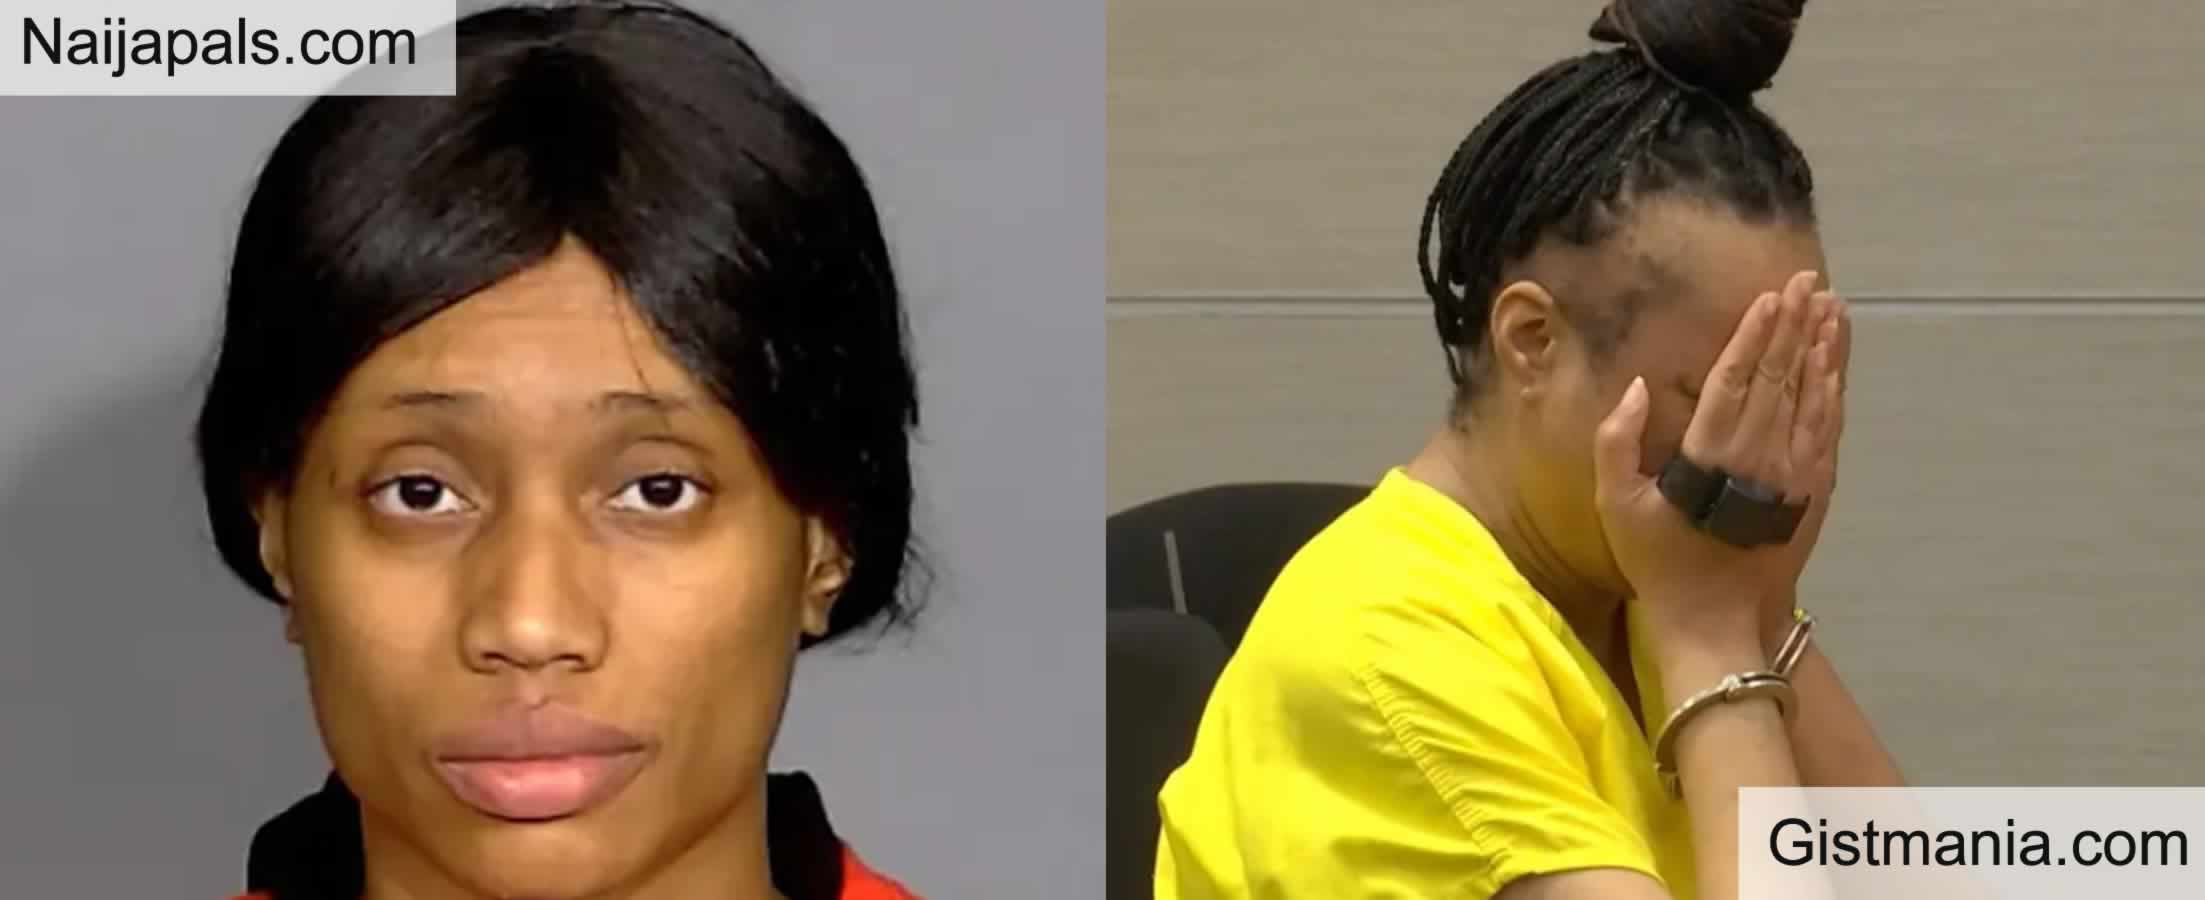 Mother Who Admitted Smothering Her 2month Old Baby To Death With Pillow While High On Meth